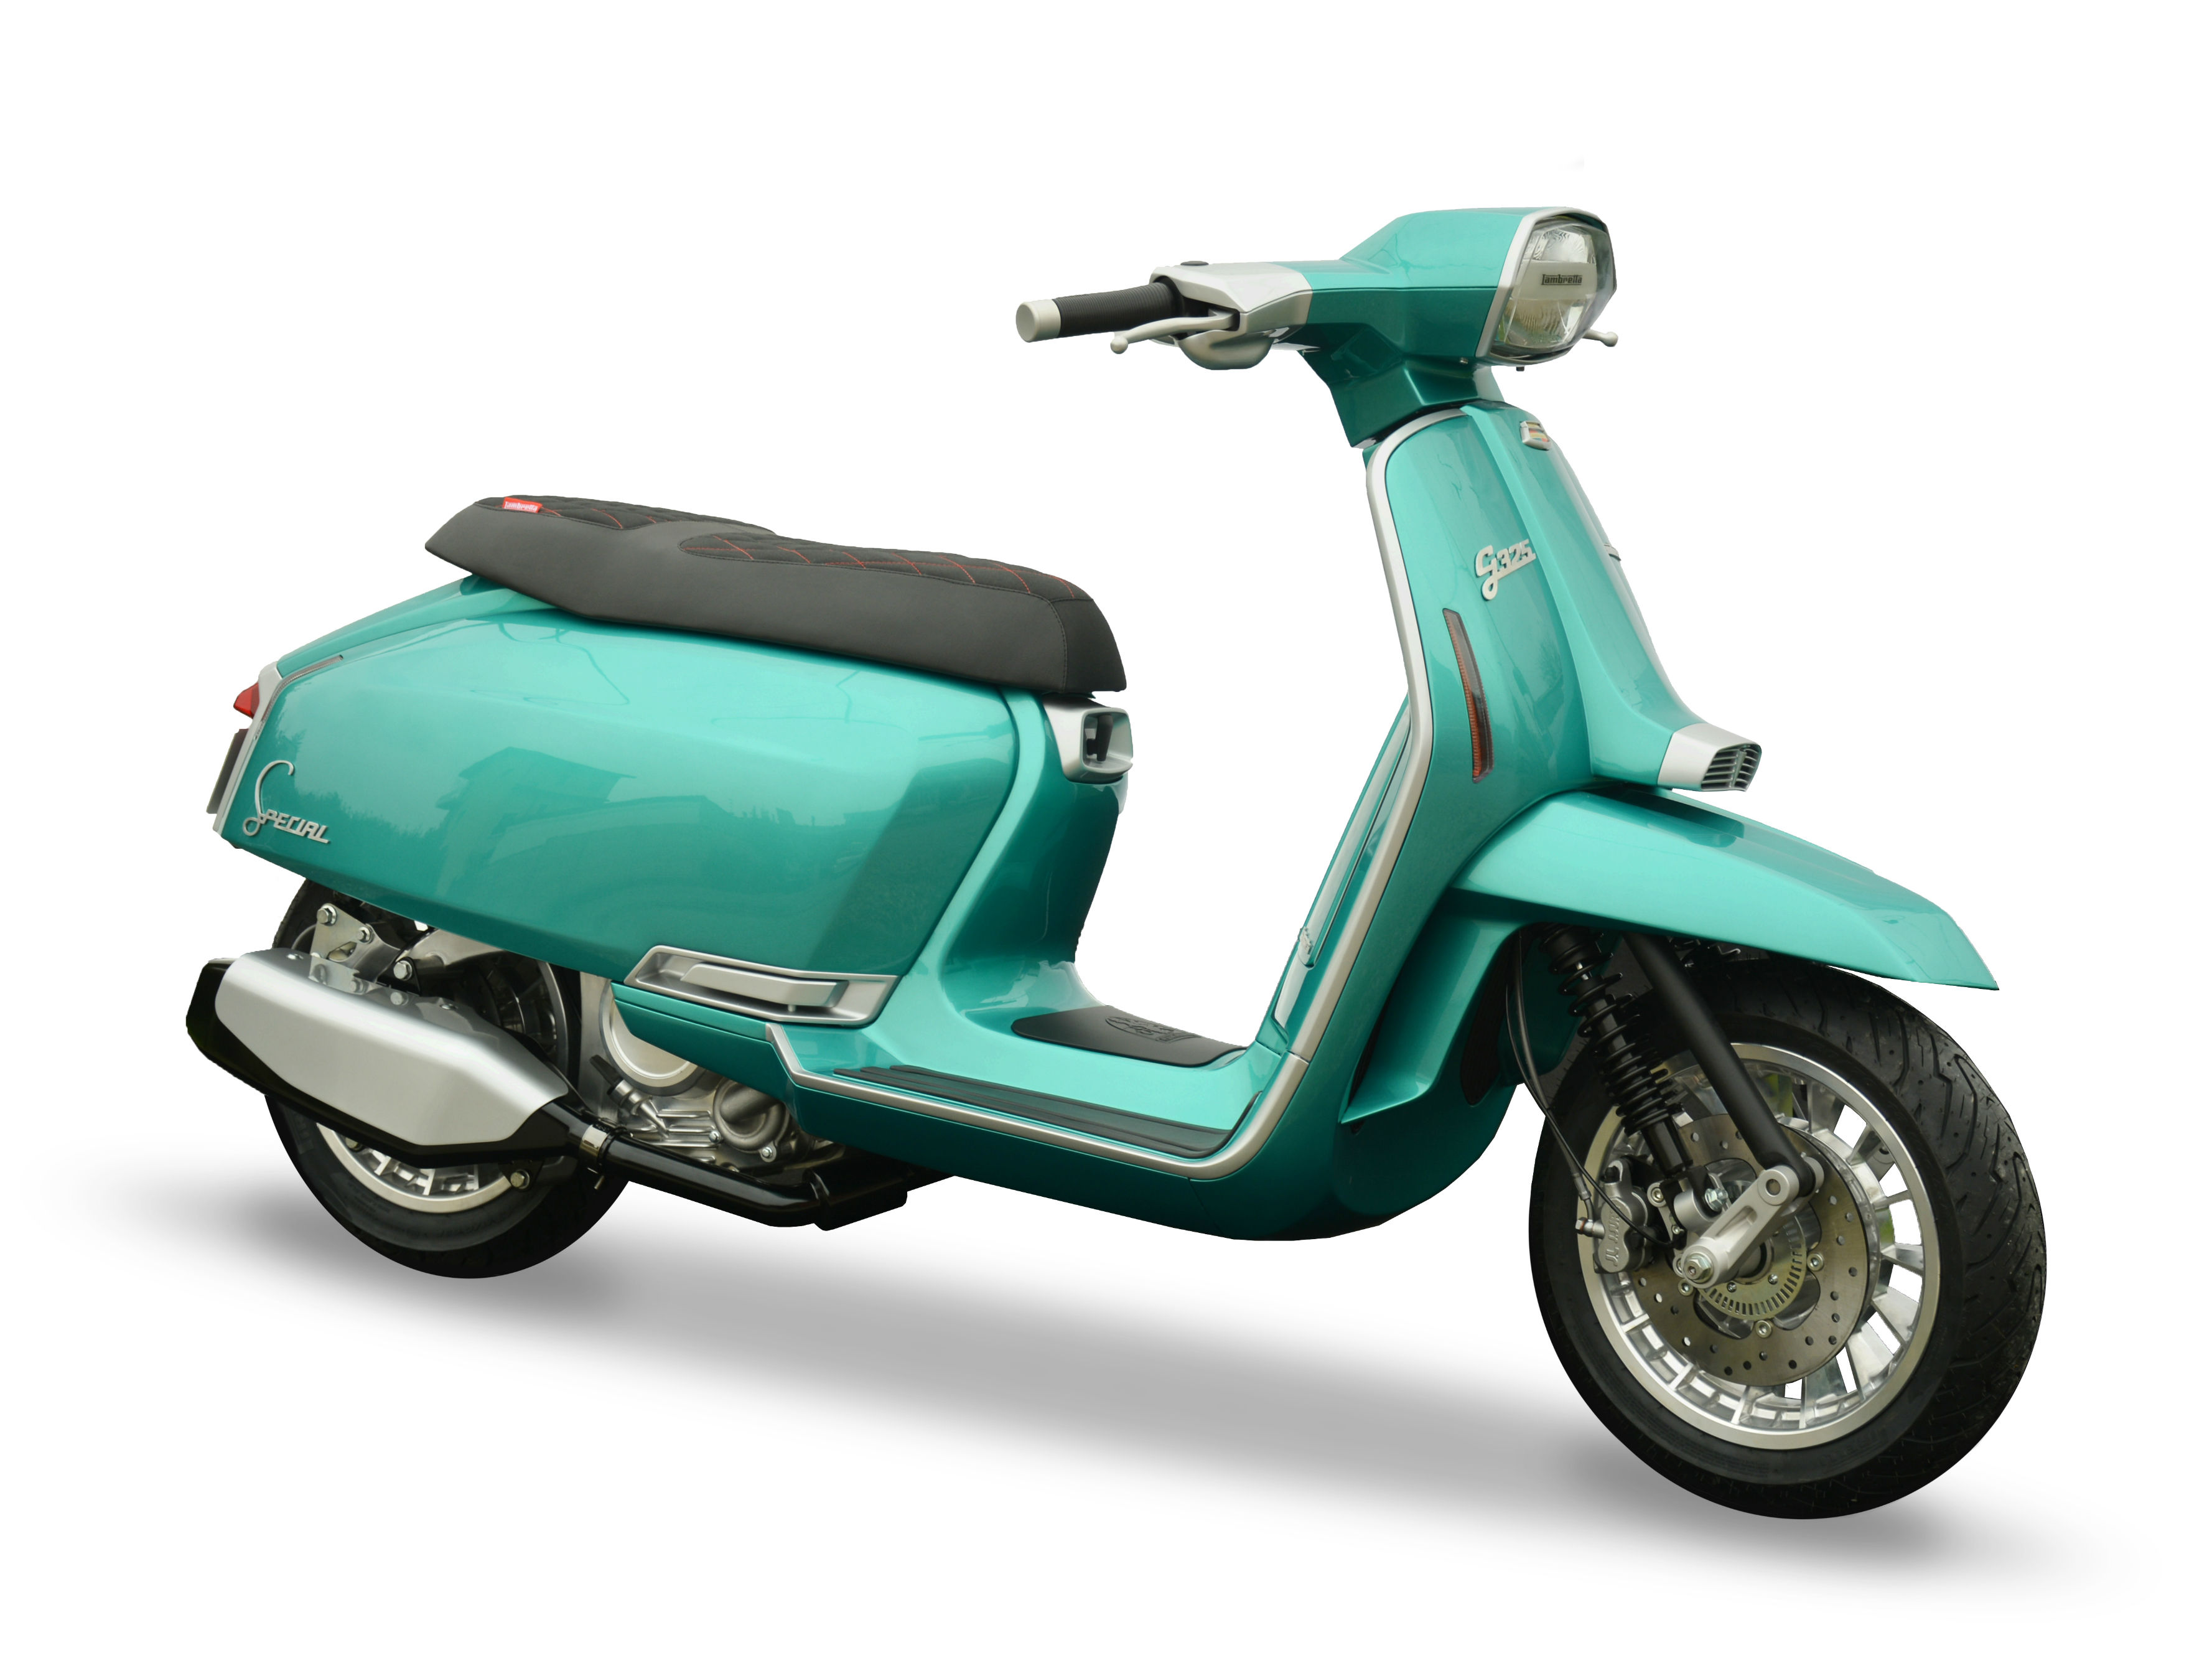 Lambretta Electric Scooter To Make Global Debut At Auto Expo 2020 ...